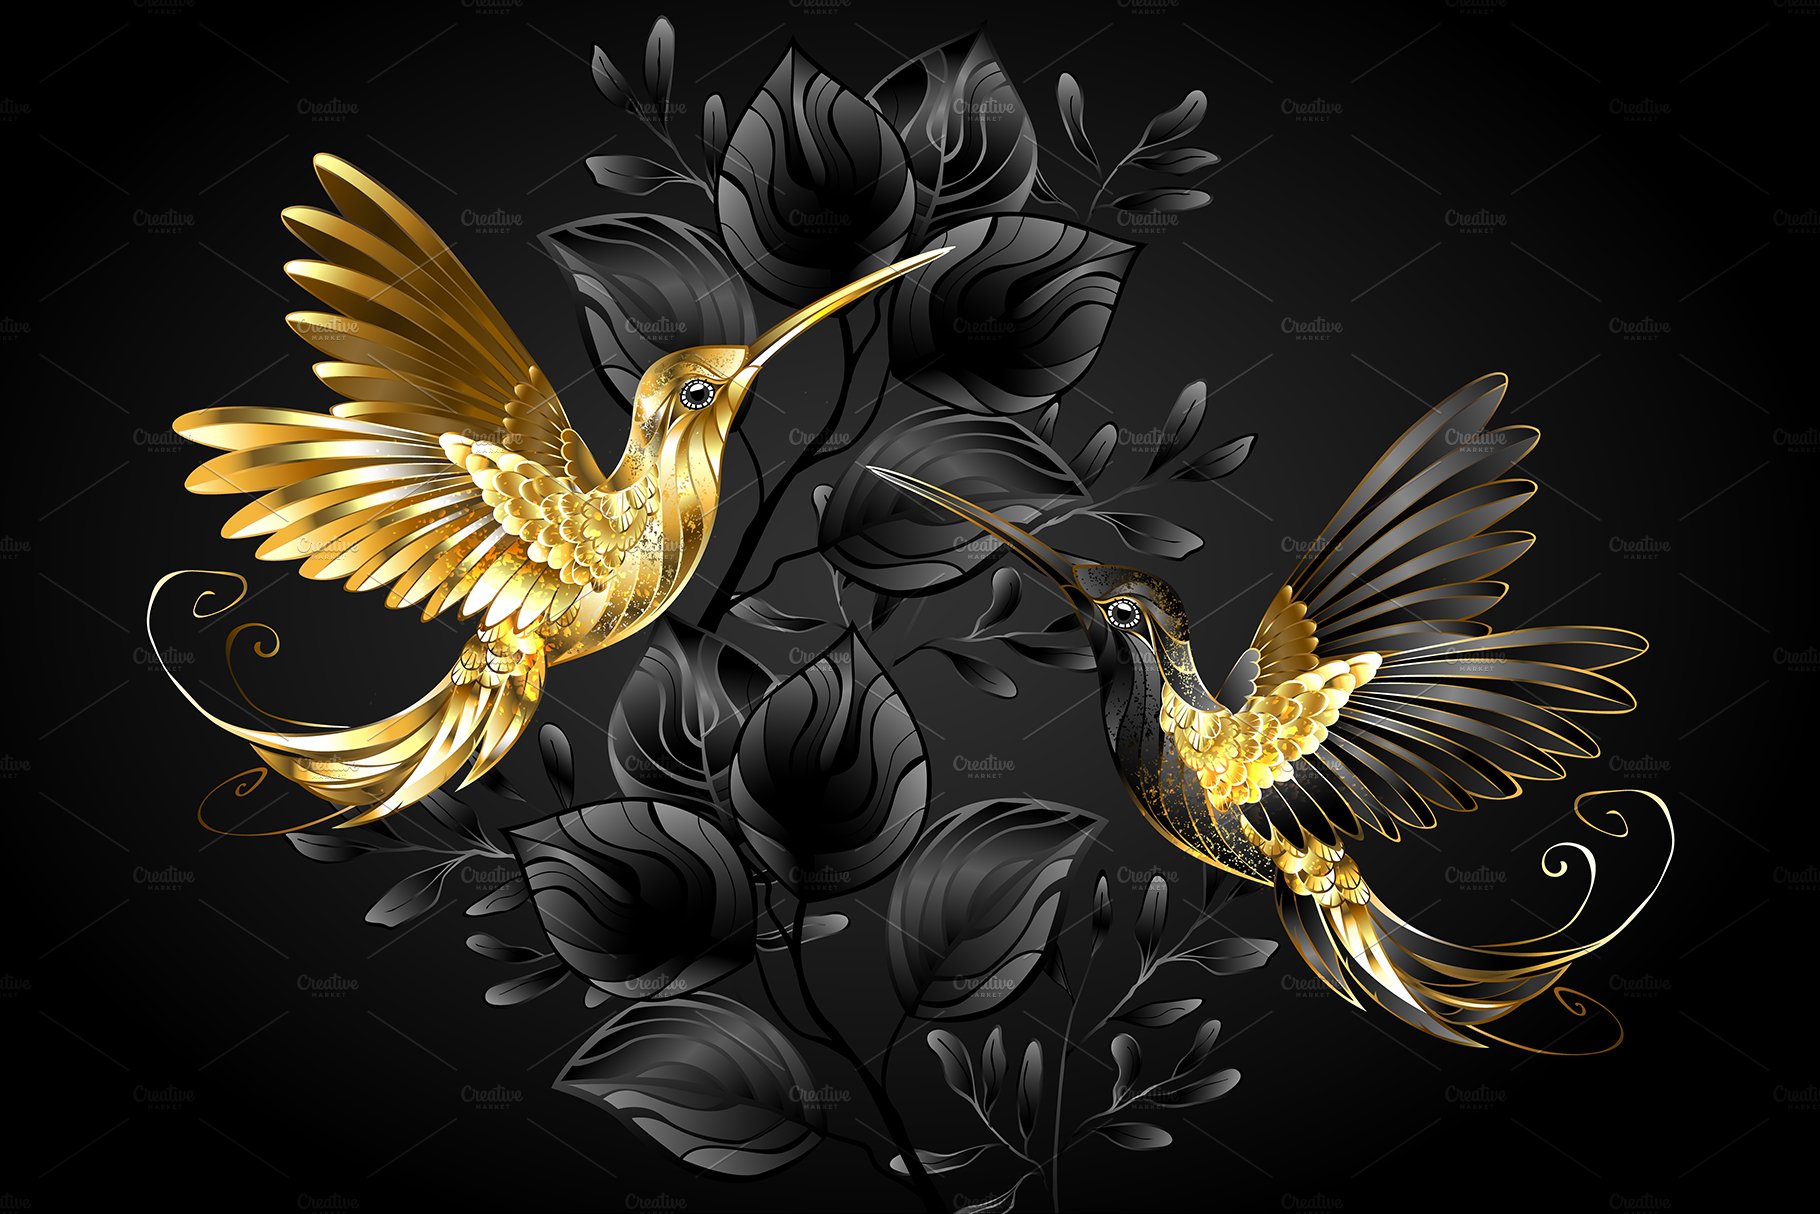 Black and Gold Hummingbirds cover image.